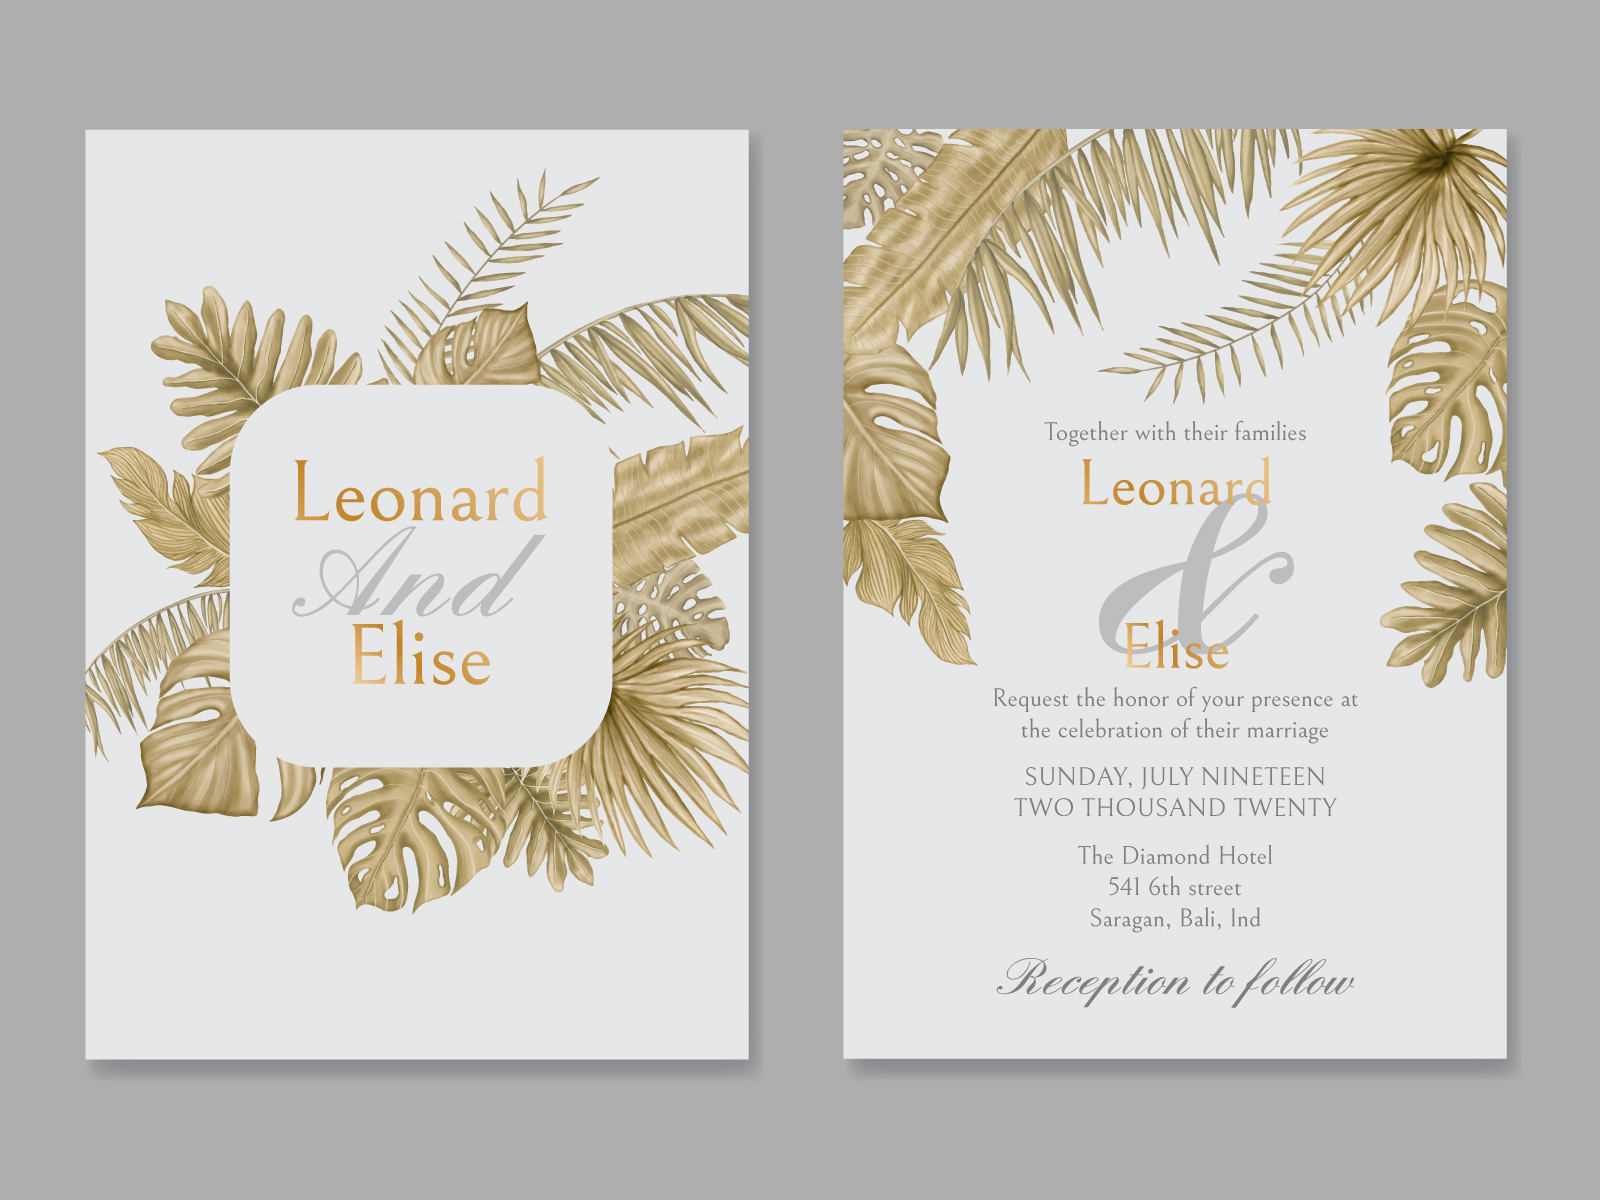 Watercolor Tropical Leaves Ornament On Wedding Invitation Card By Dheo Donny Adittya On Dribbble